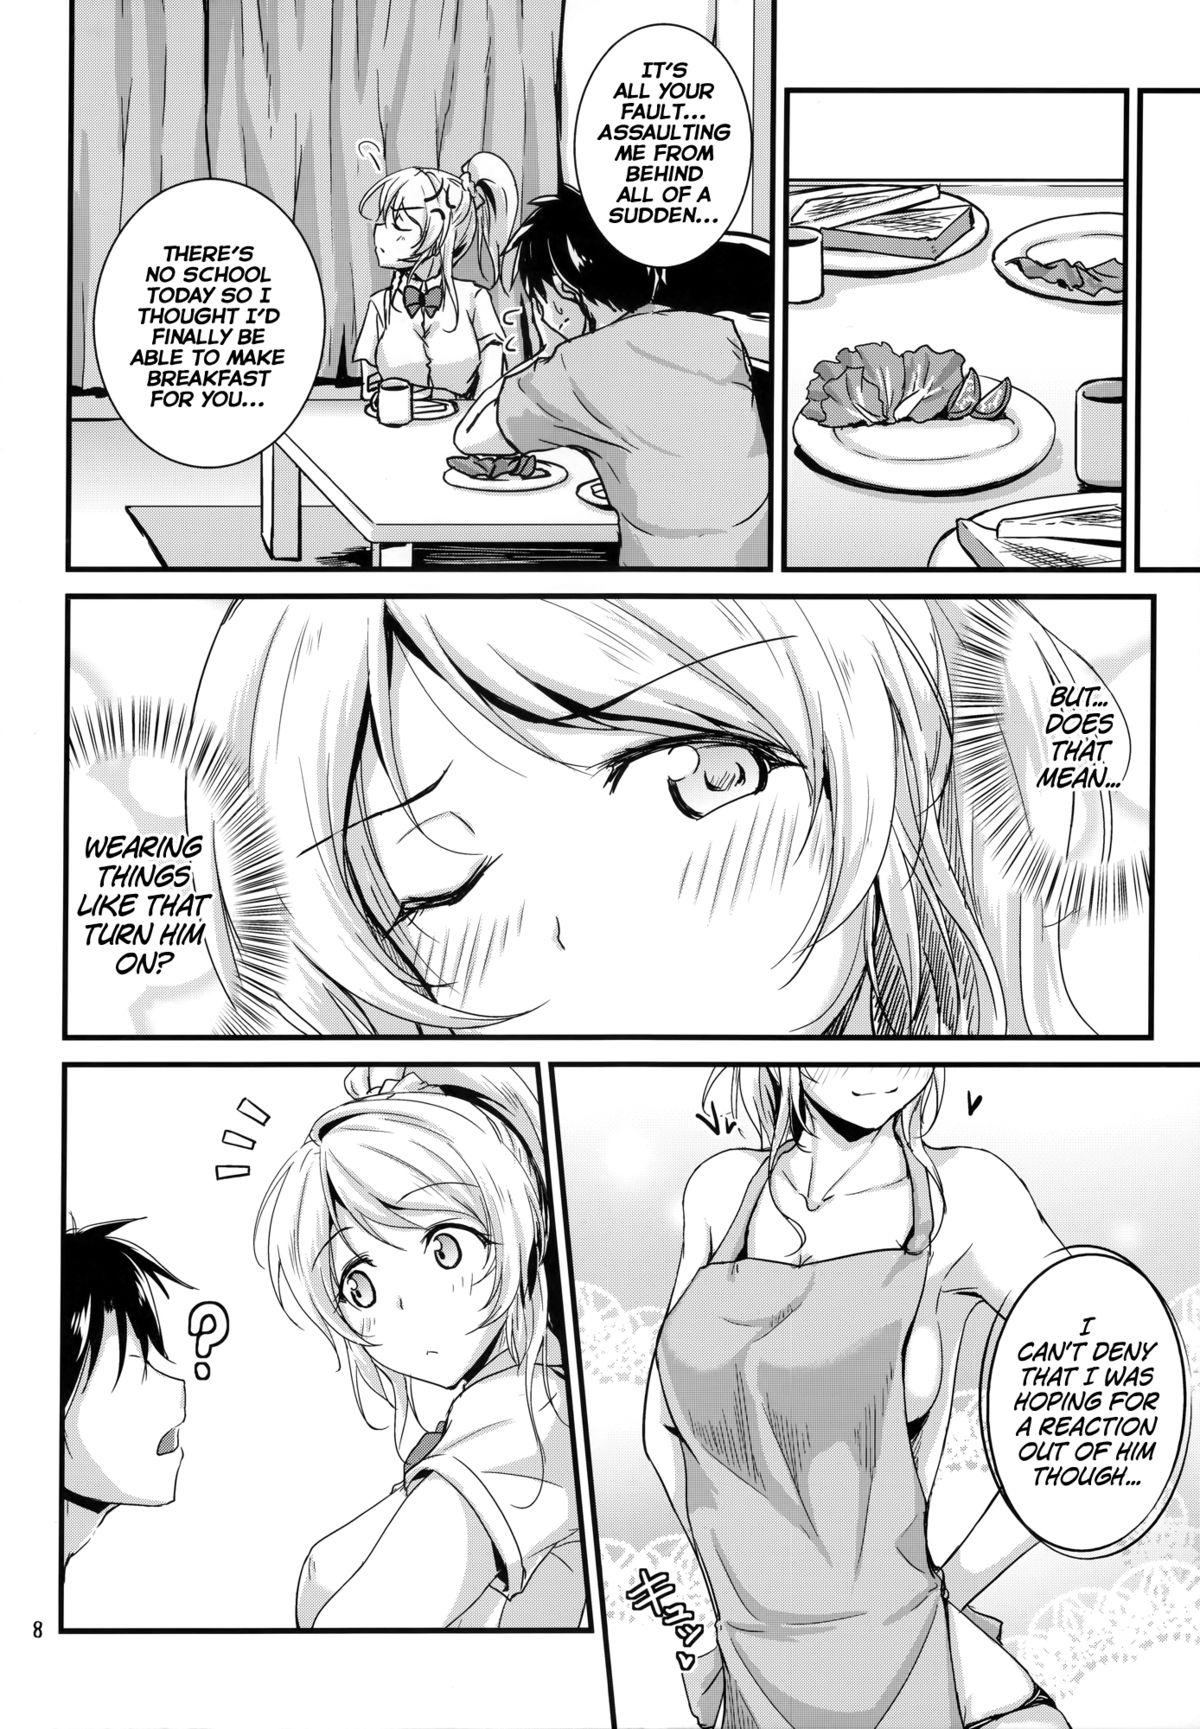 (C86) [Nuno no Ie (Moonlight)] Let's Study ×××4 (Love Live!) [English] [Facedesk] page 7 full